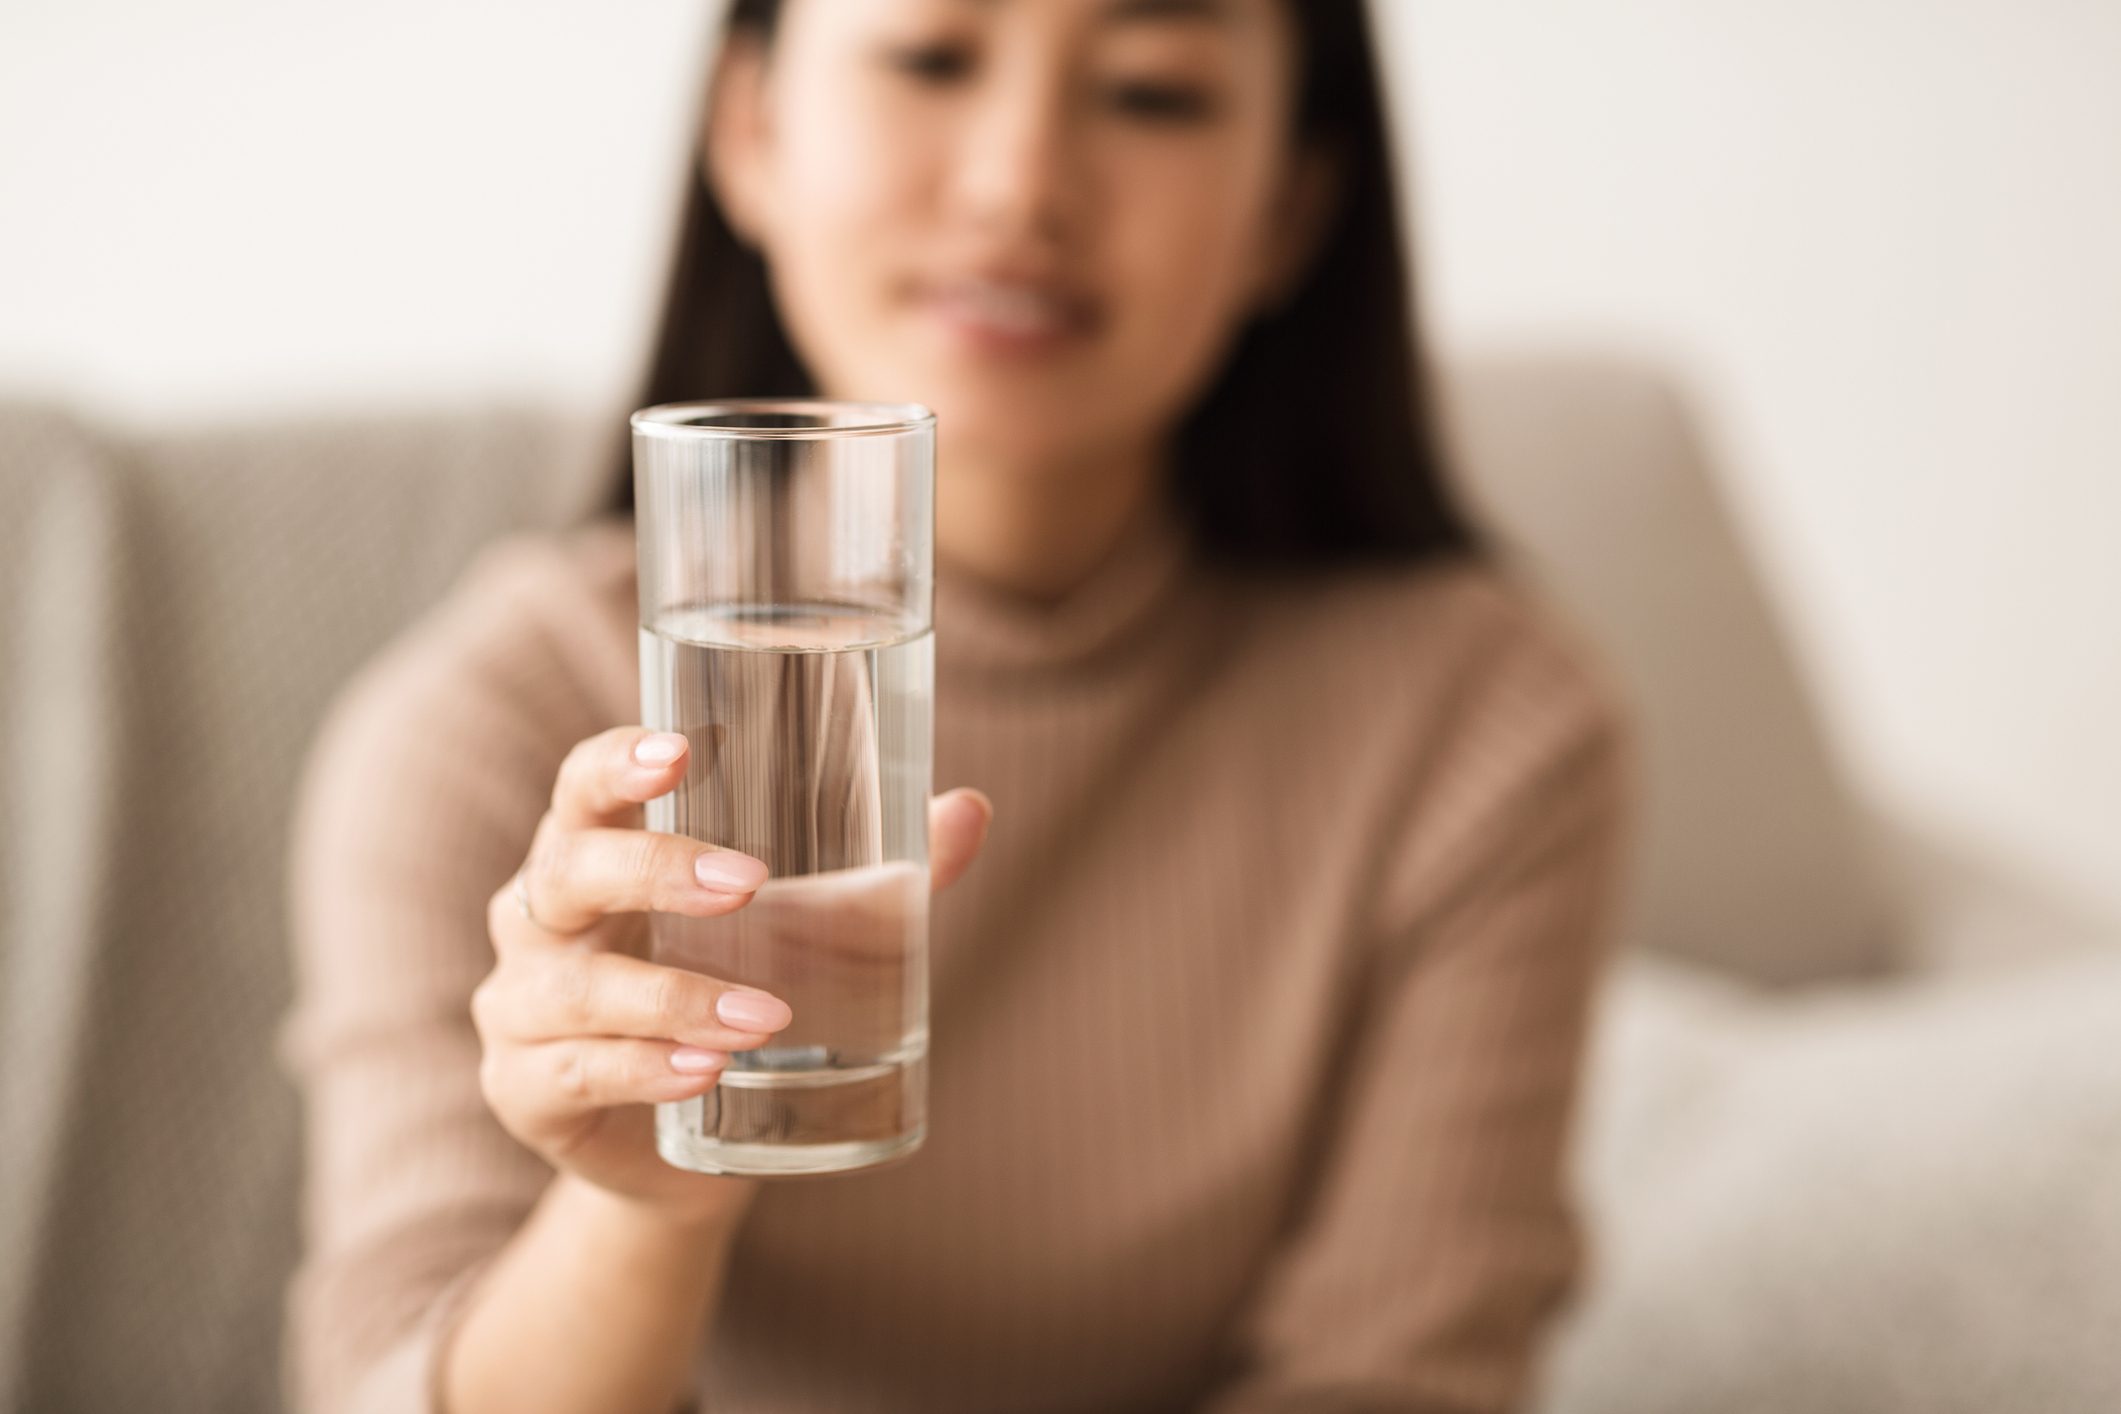 Can You Drink Water While Fasting? The Healthy